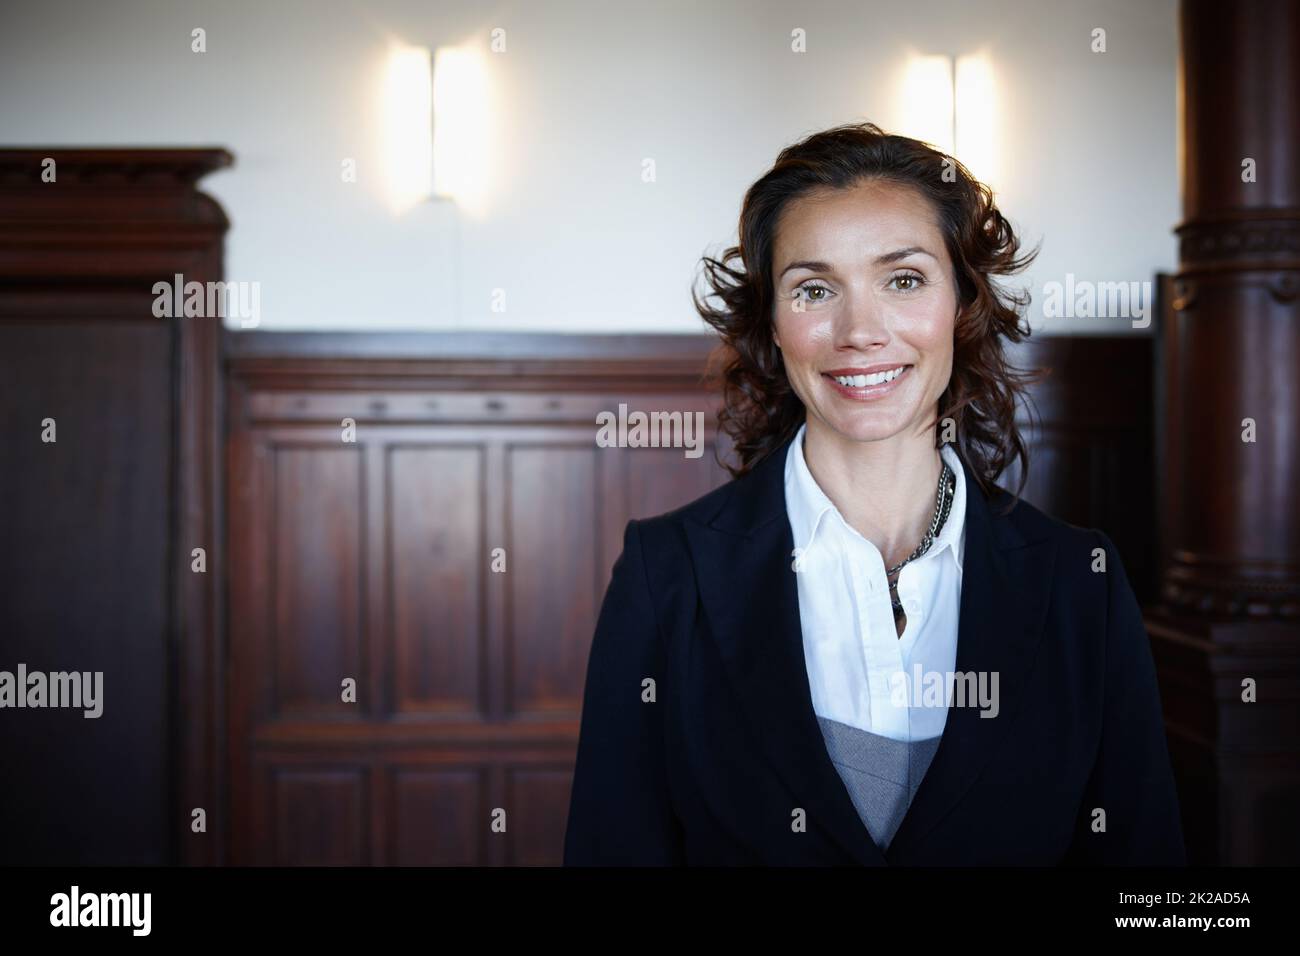 Cropped shot of an attractive mature female lawyer standing in a courtroom and smiling. Cropped shot of an attractive mature female lawyer standing in a courtroom and smiling. Stock Photo